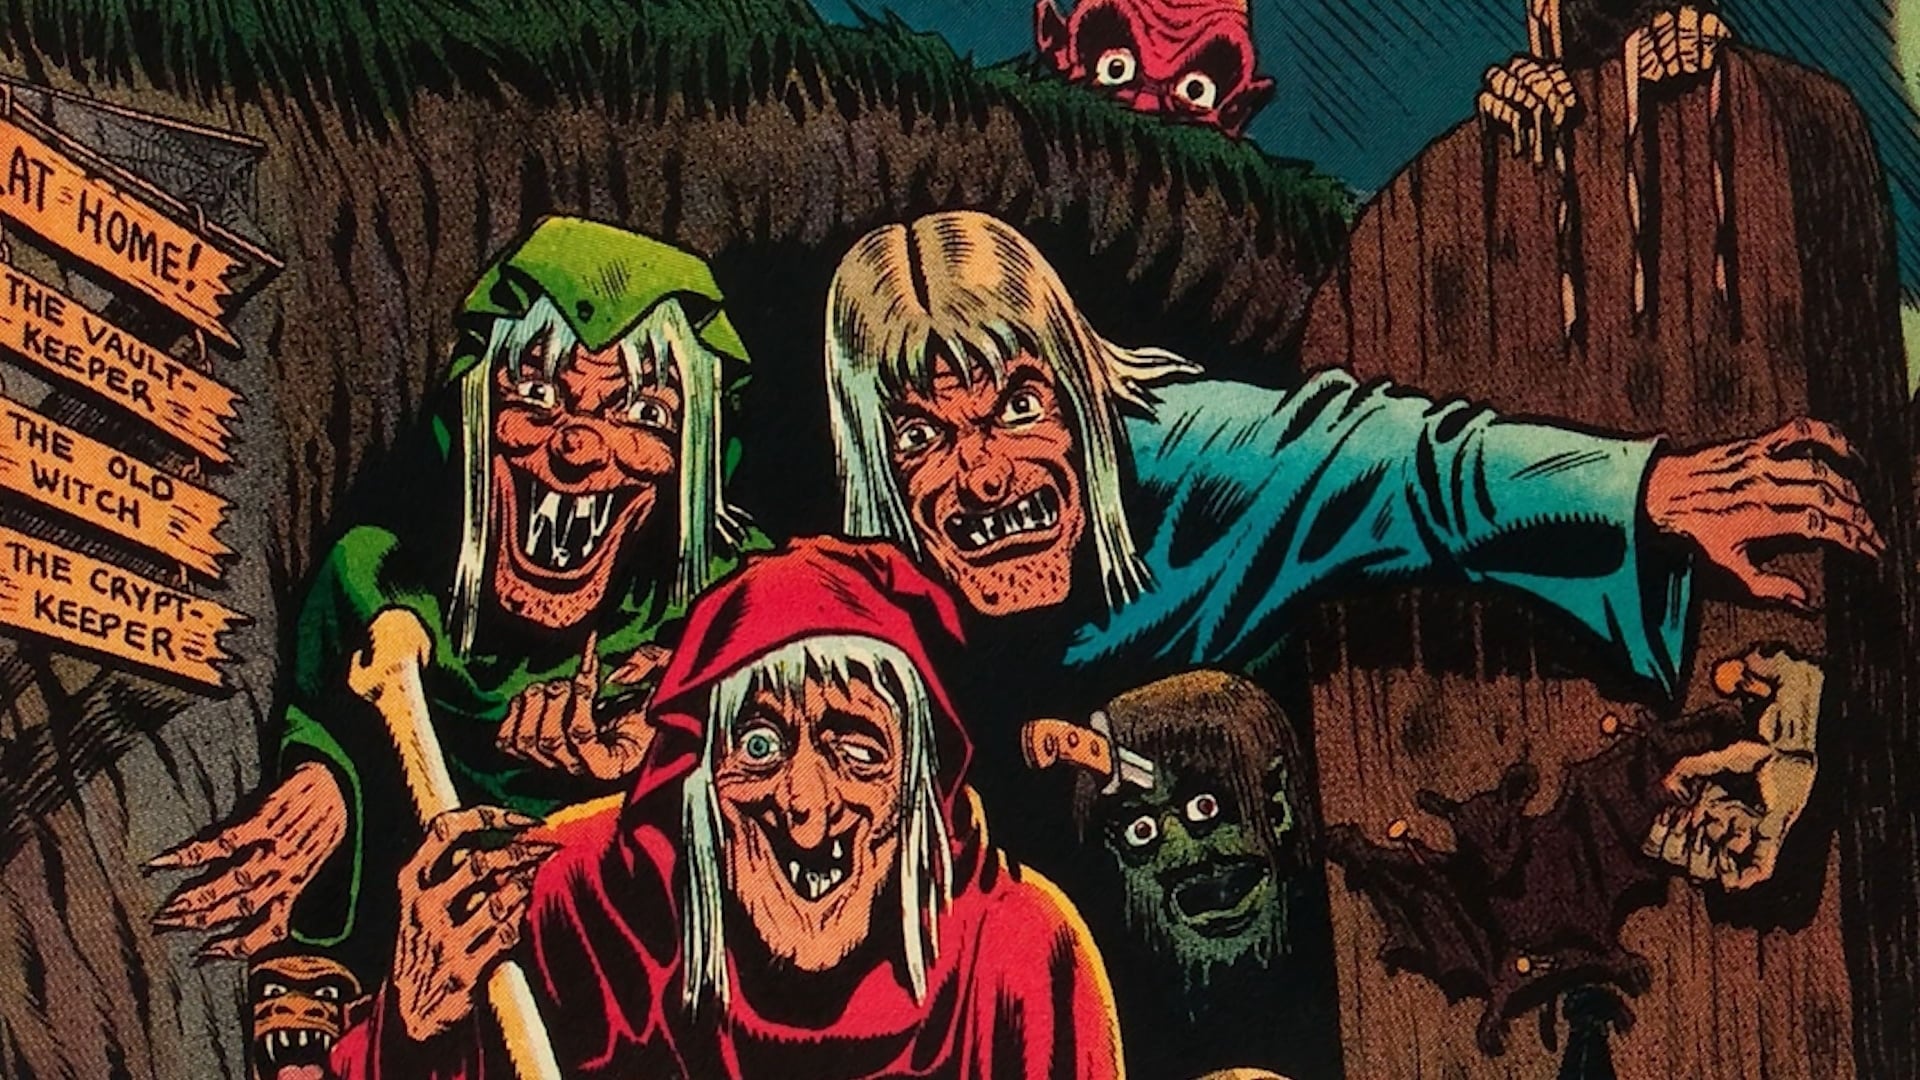 Just Desserts: The Making of 'Creepshow'